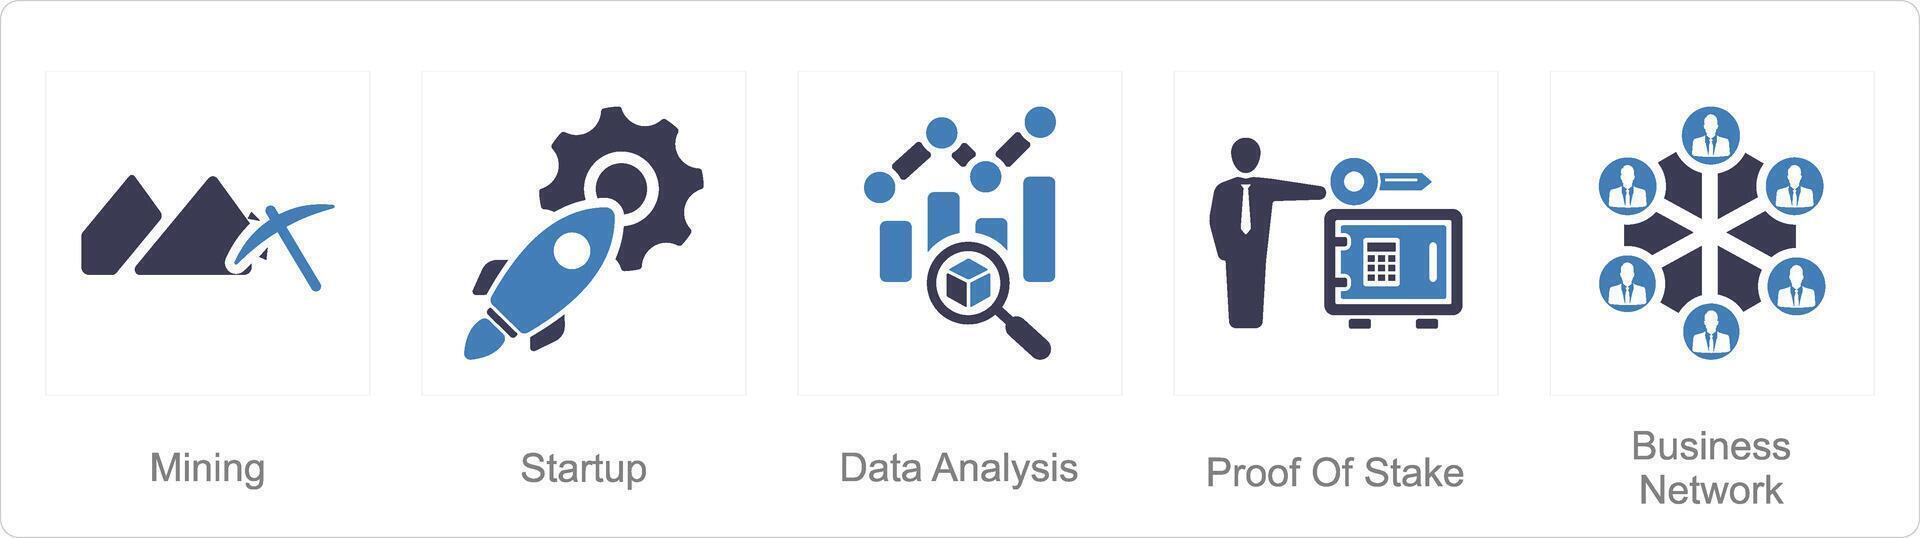 A set of 5 Blockchain icons as mining, startup, data analysis vector